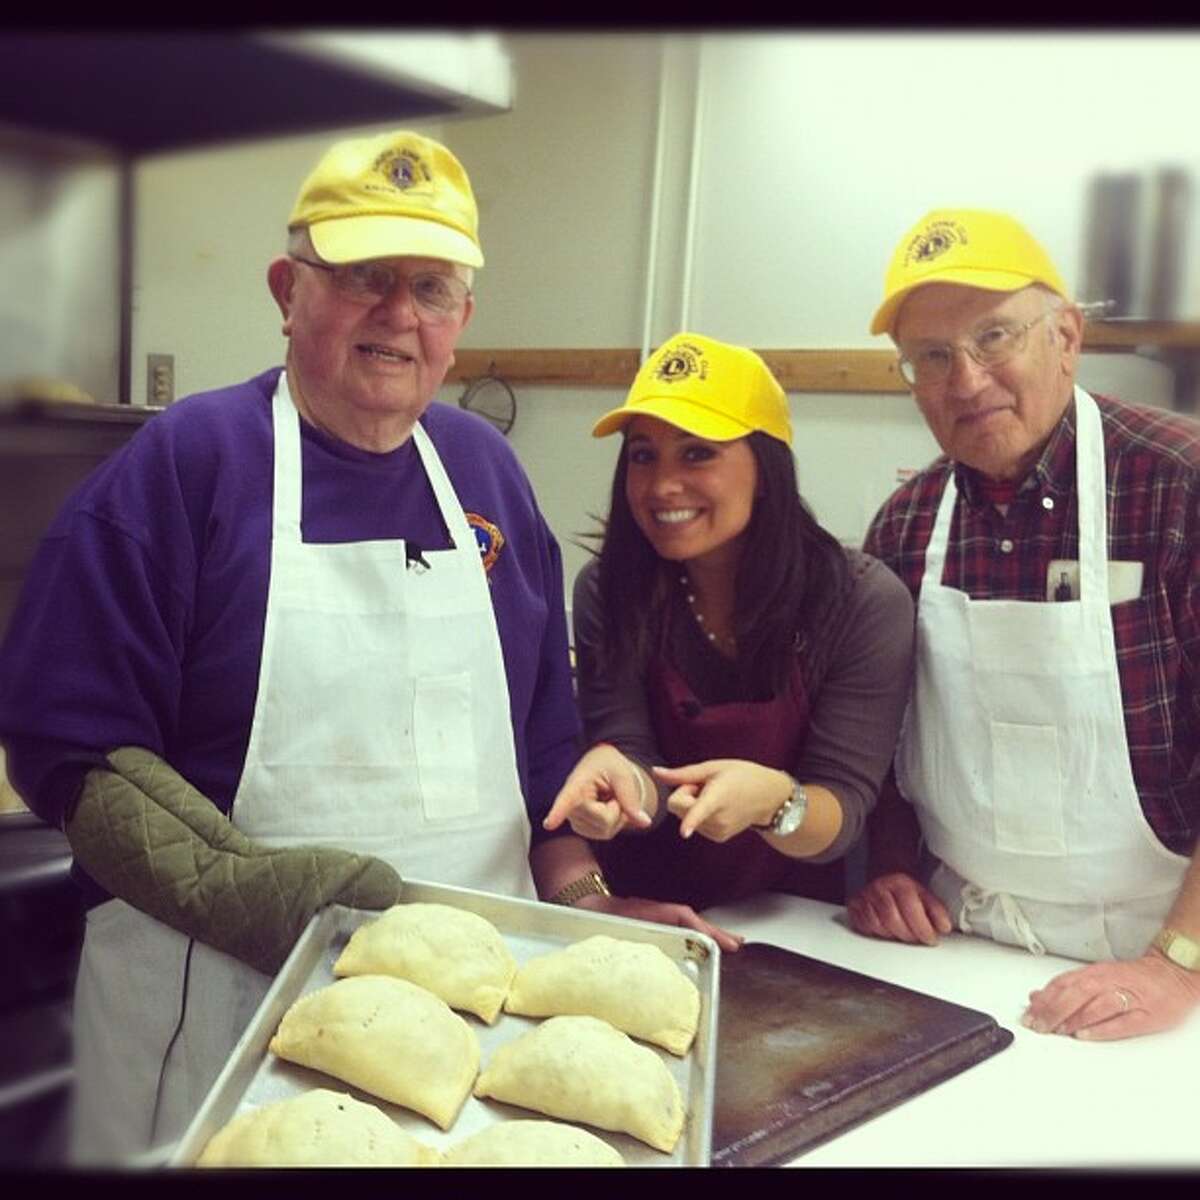 Ken Kuttilla (left) and John Makinen of the Kaleva Lions Club were recently honored as recipients of Lions International’s Melvin Jones Fellowship Award. Here’ they’re seen making pasties, which the club sells, with 9&10 News reporter Alex Jokich. (Courtesy Photo)